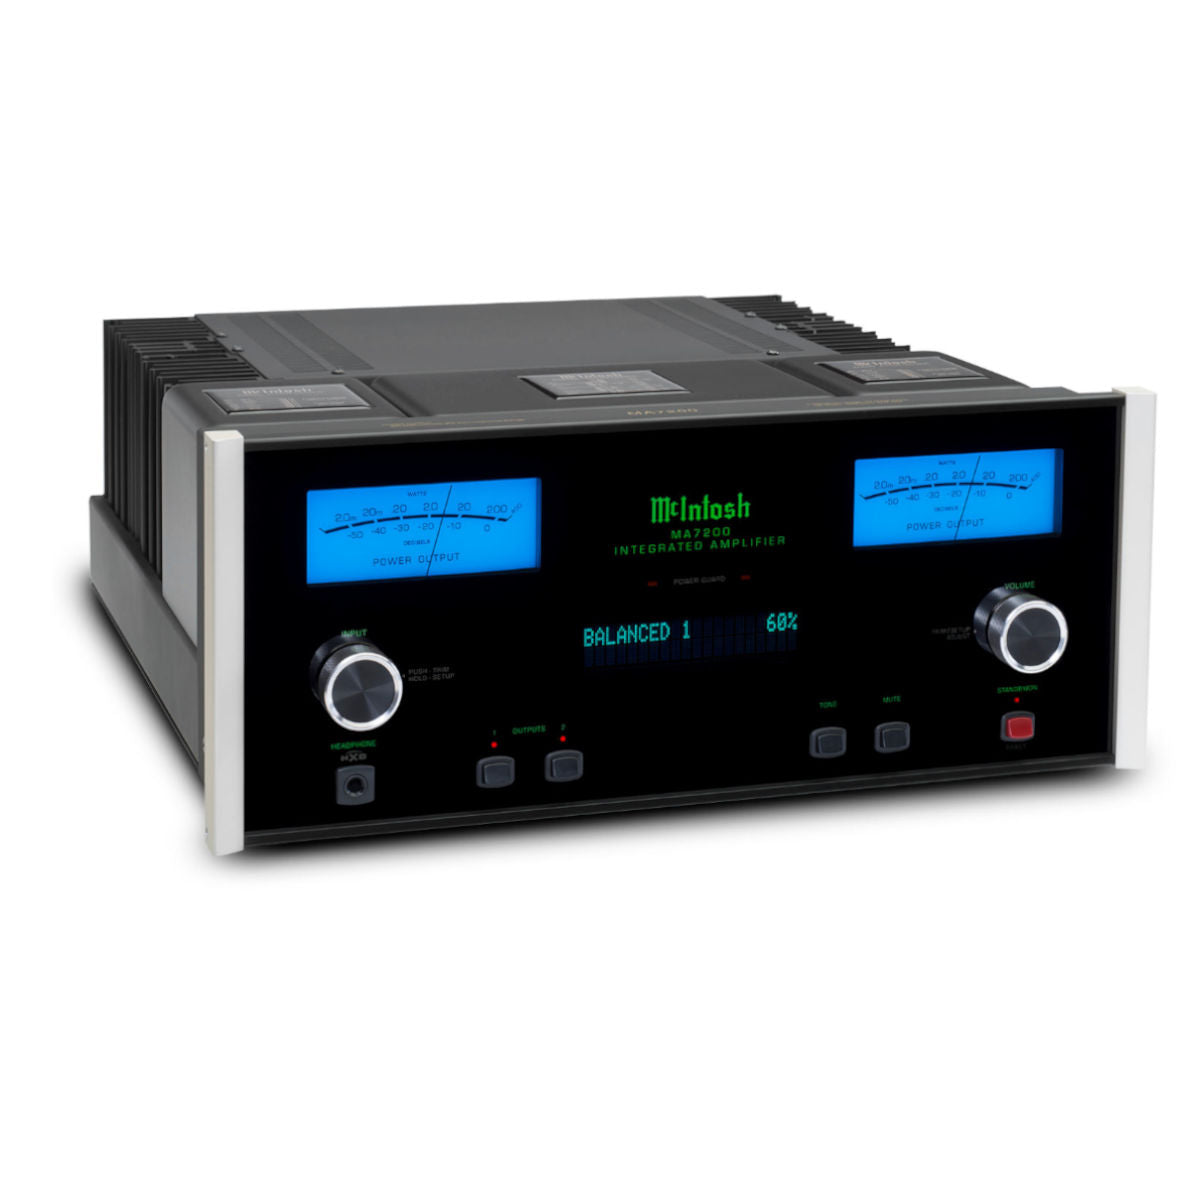 McIntosh MA7200 2-Channel Integrated Amplifier - Ooberpad India